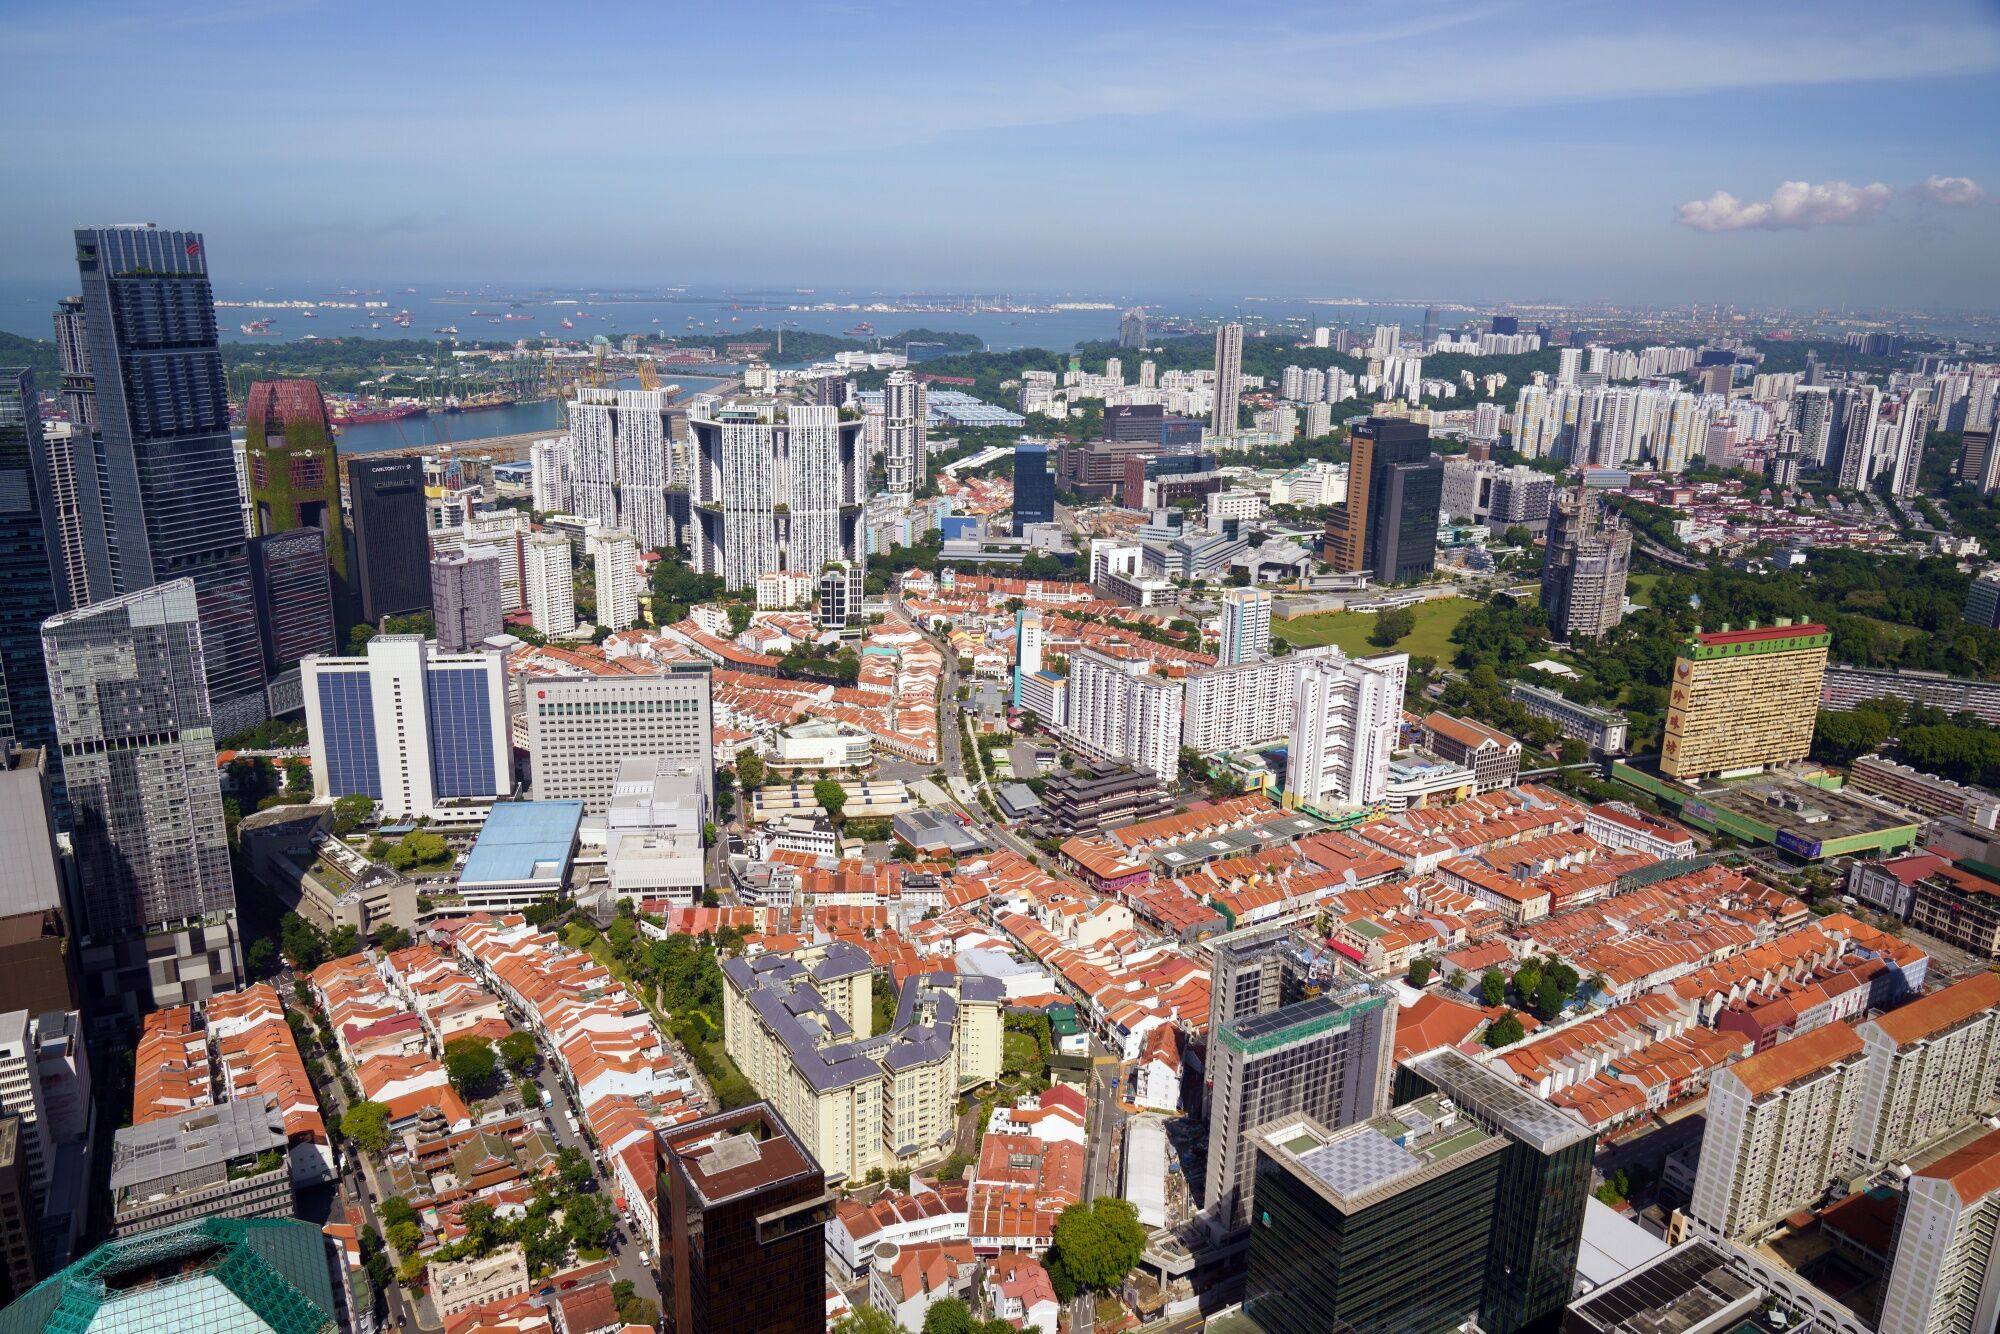 Residential and commercial buildings in Singapore. Rental growth across mass-market flats and high-end apartments has largely moderated in the city state, the latest data shows. Photo: Bloomberg